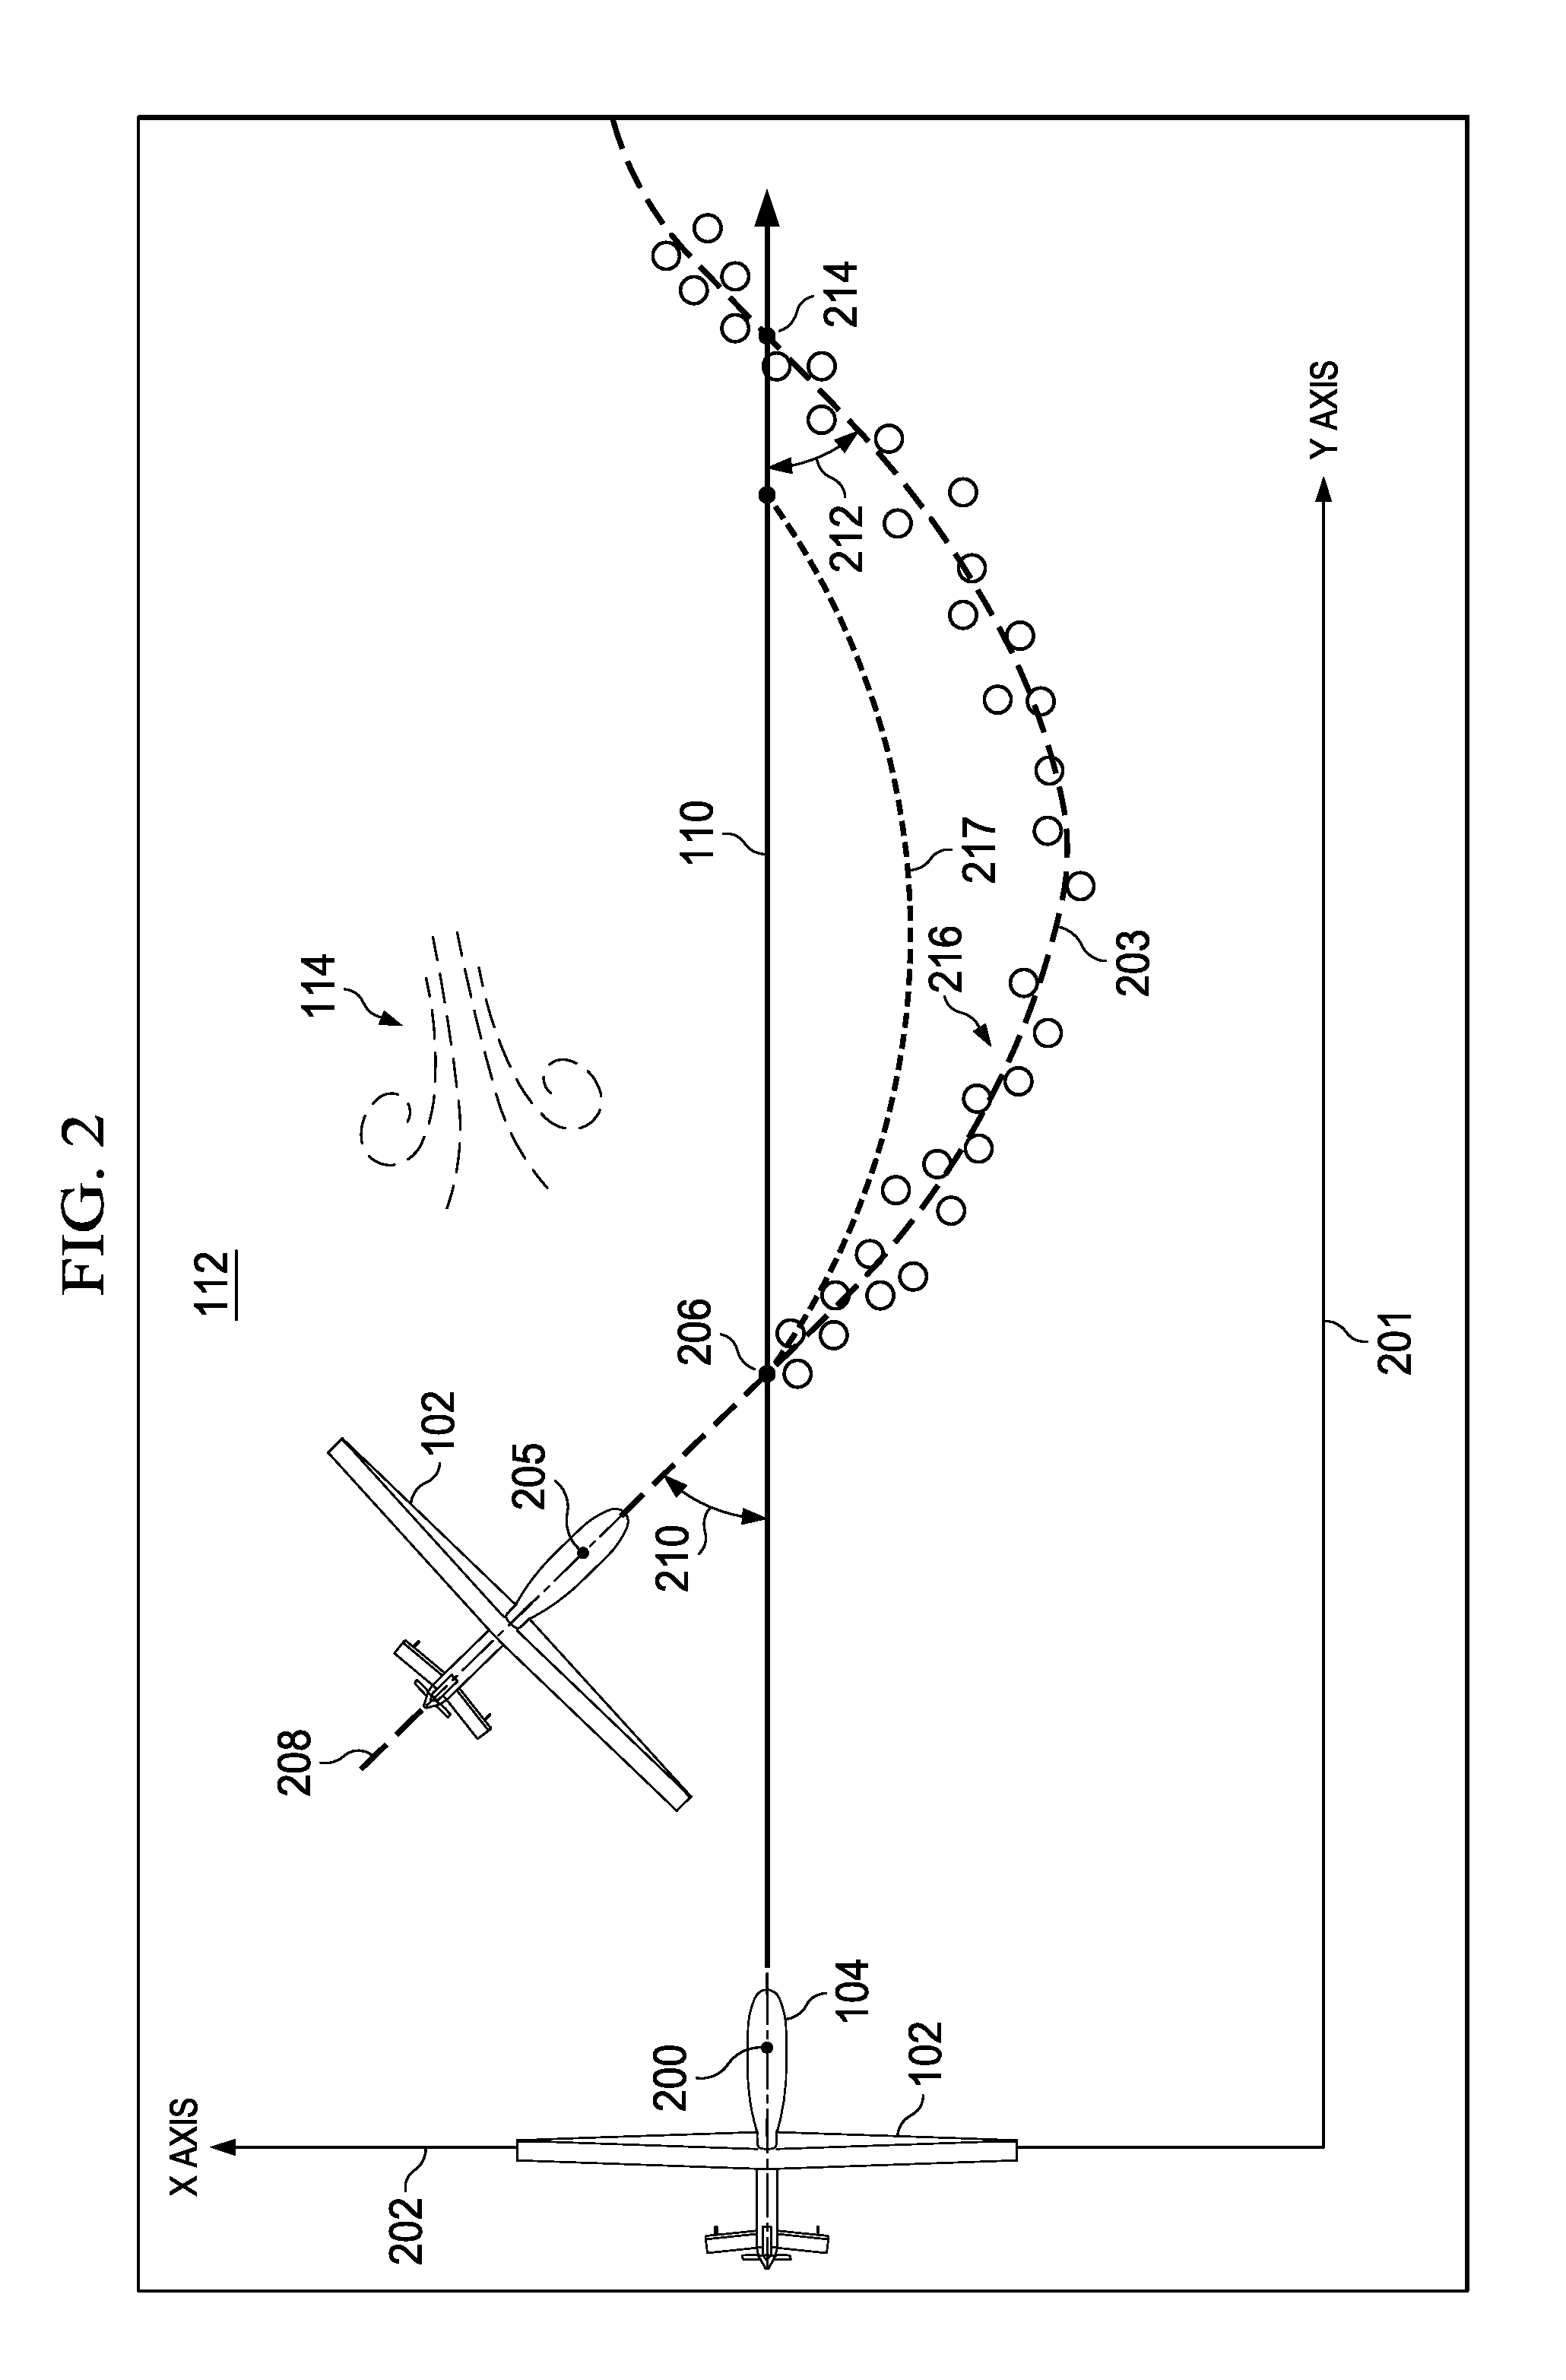 Wind Calculation System Using a Constant Bank Angle Turn